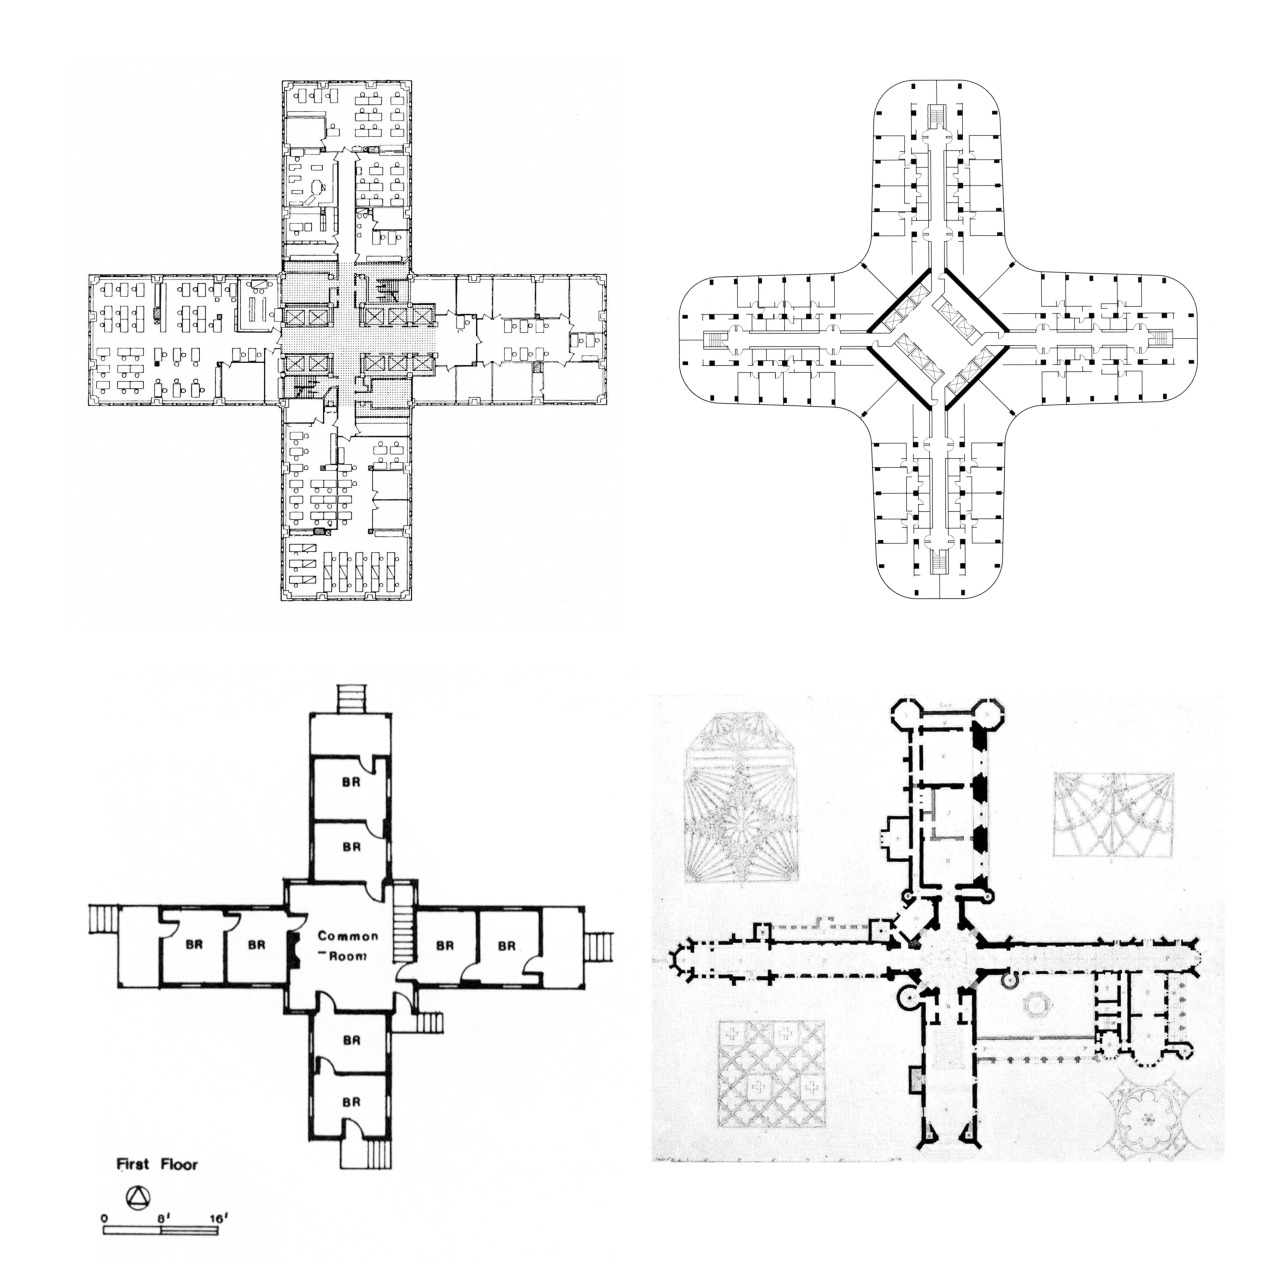 Architectural Drawings, Models, Photos, etc